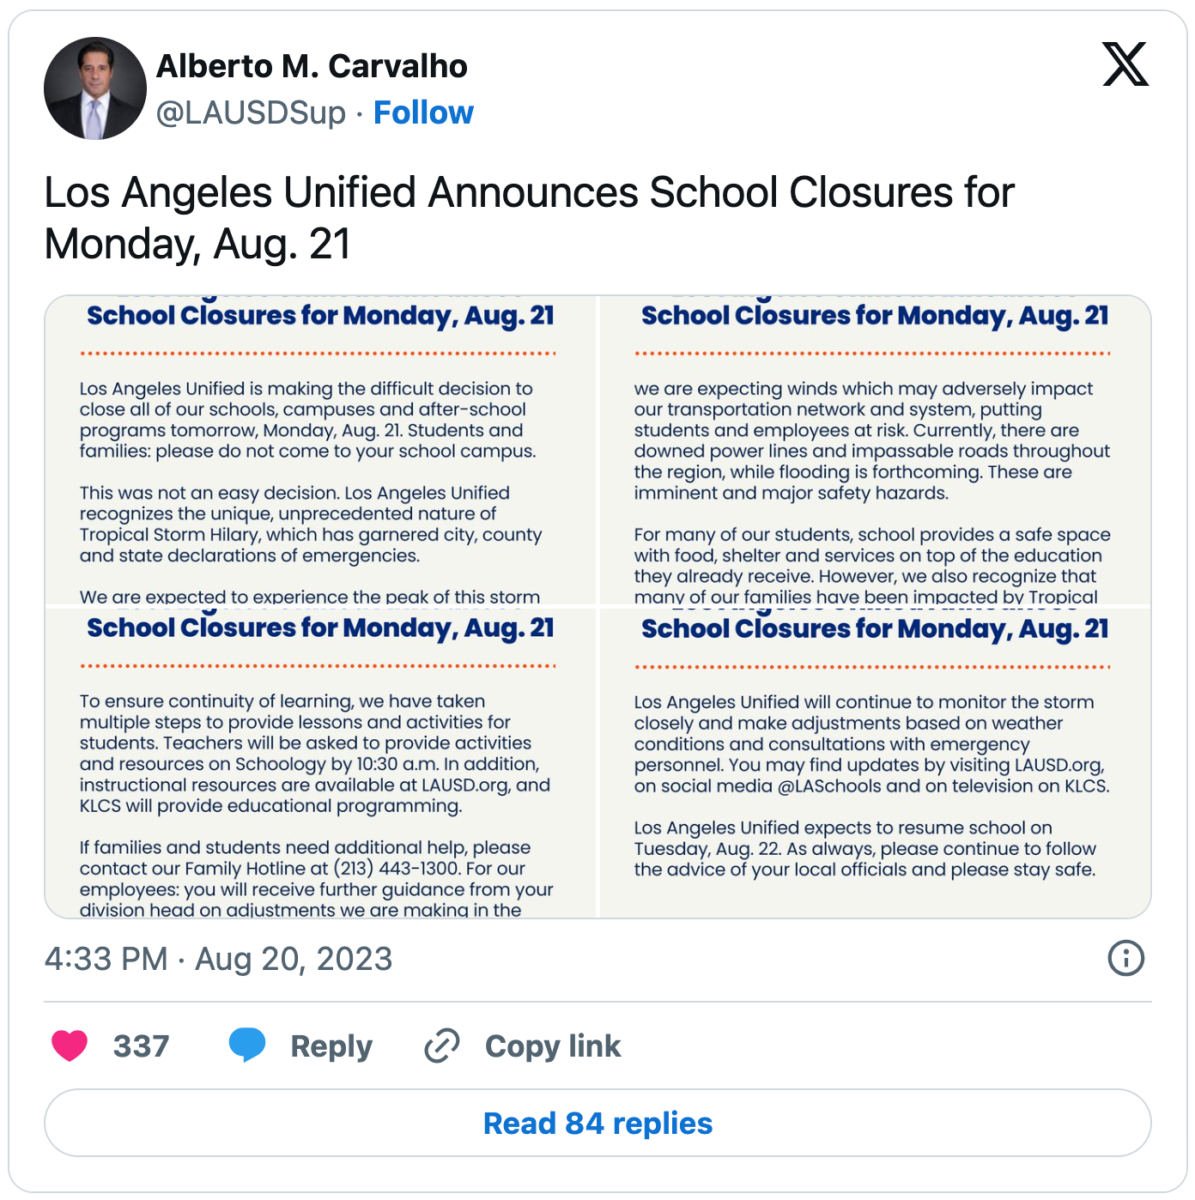 Tweet from LAUSD Superintendent Alberto Carvalho announcing that all schools will be closed on Monday Aug. 21 due to the impact of Tropical Storm Hilary.